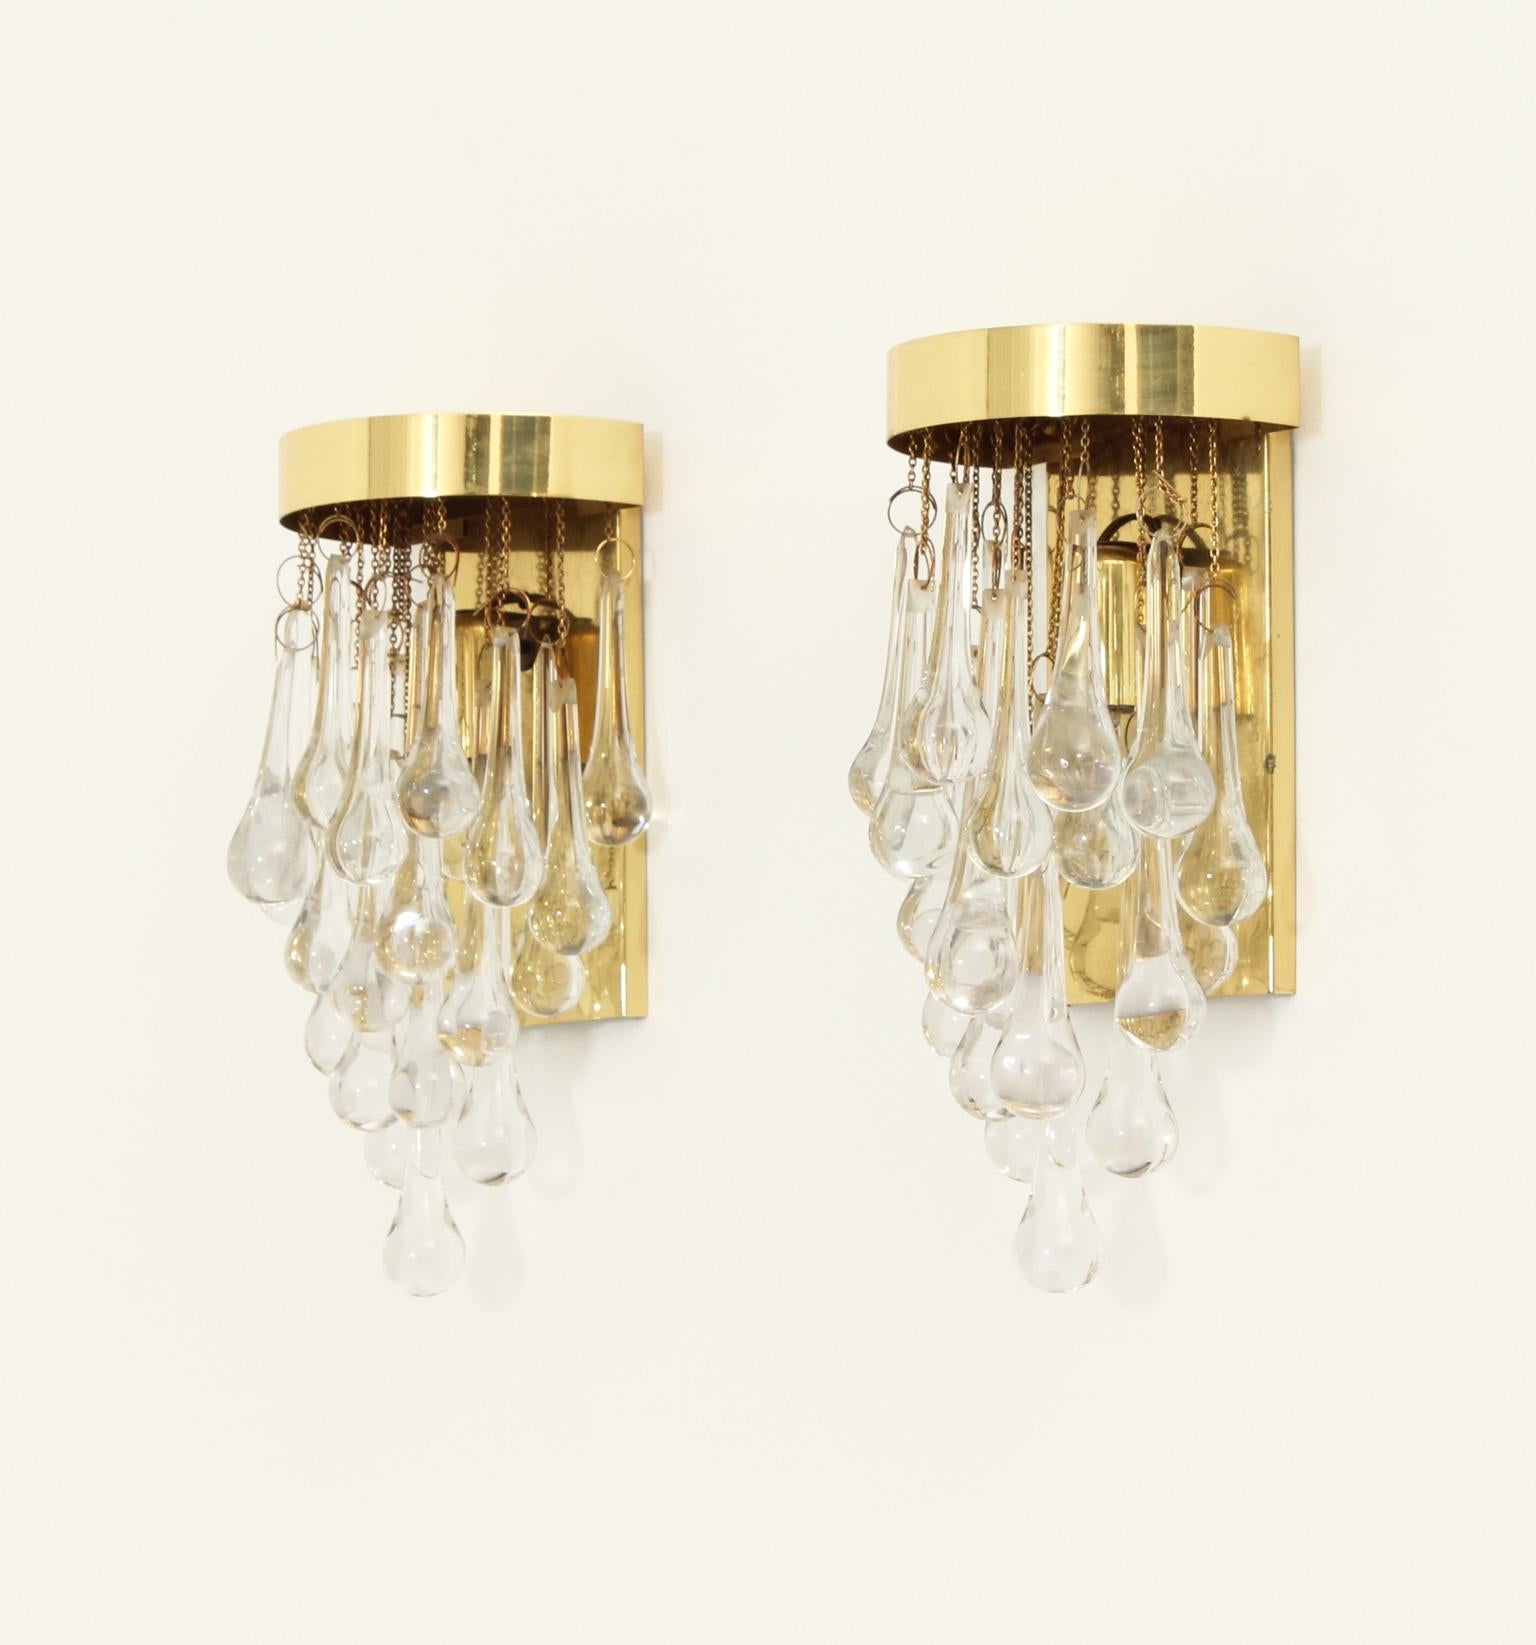 Hollywood Regency Pair of Brass and Glass Teardrop Sconces by Lumica, Spain, 1970's For Sale